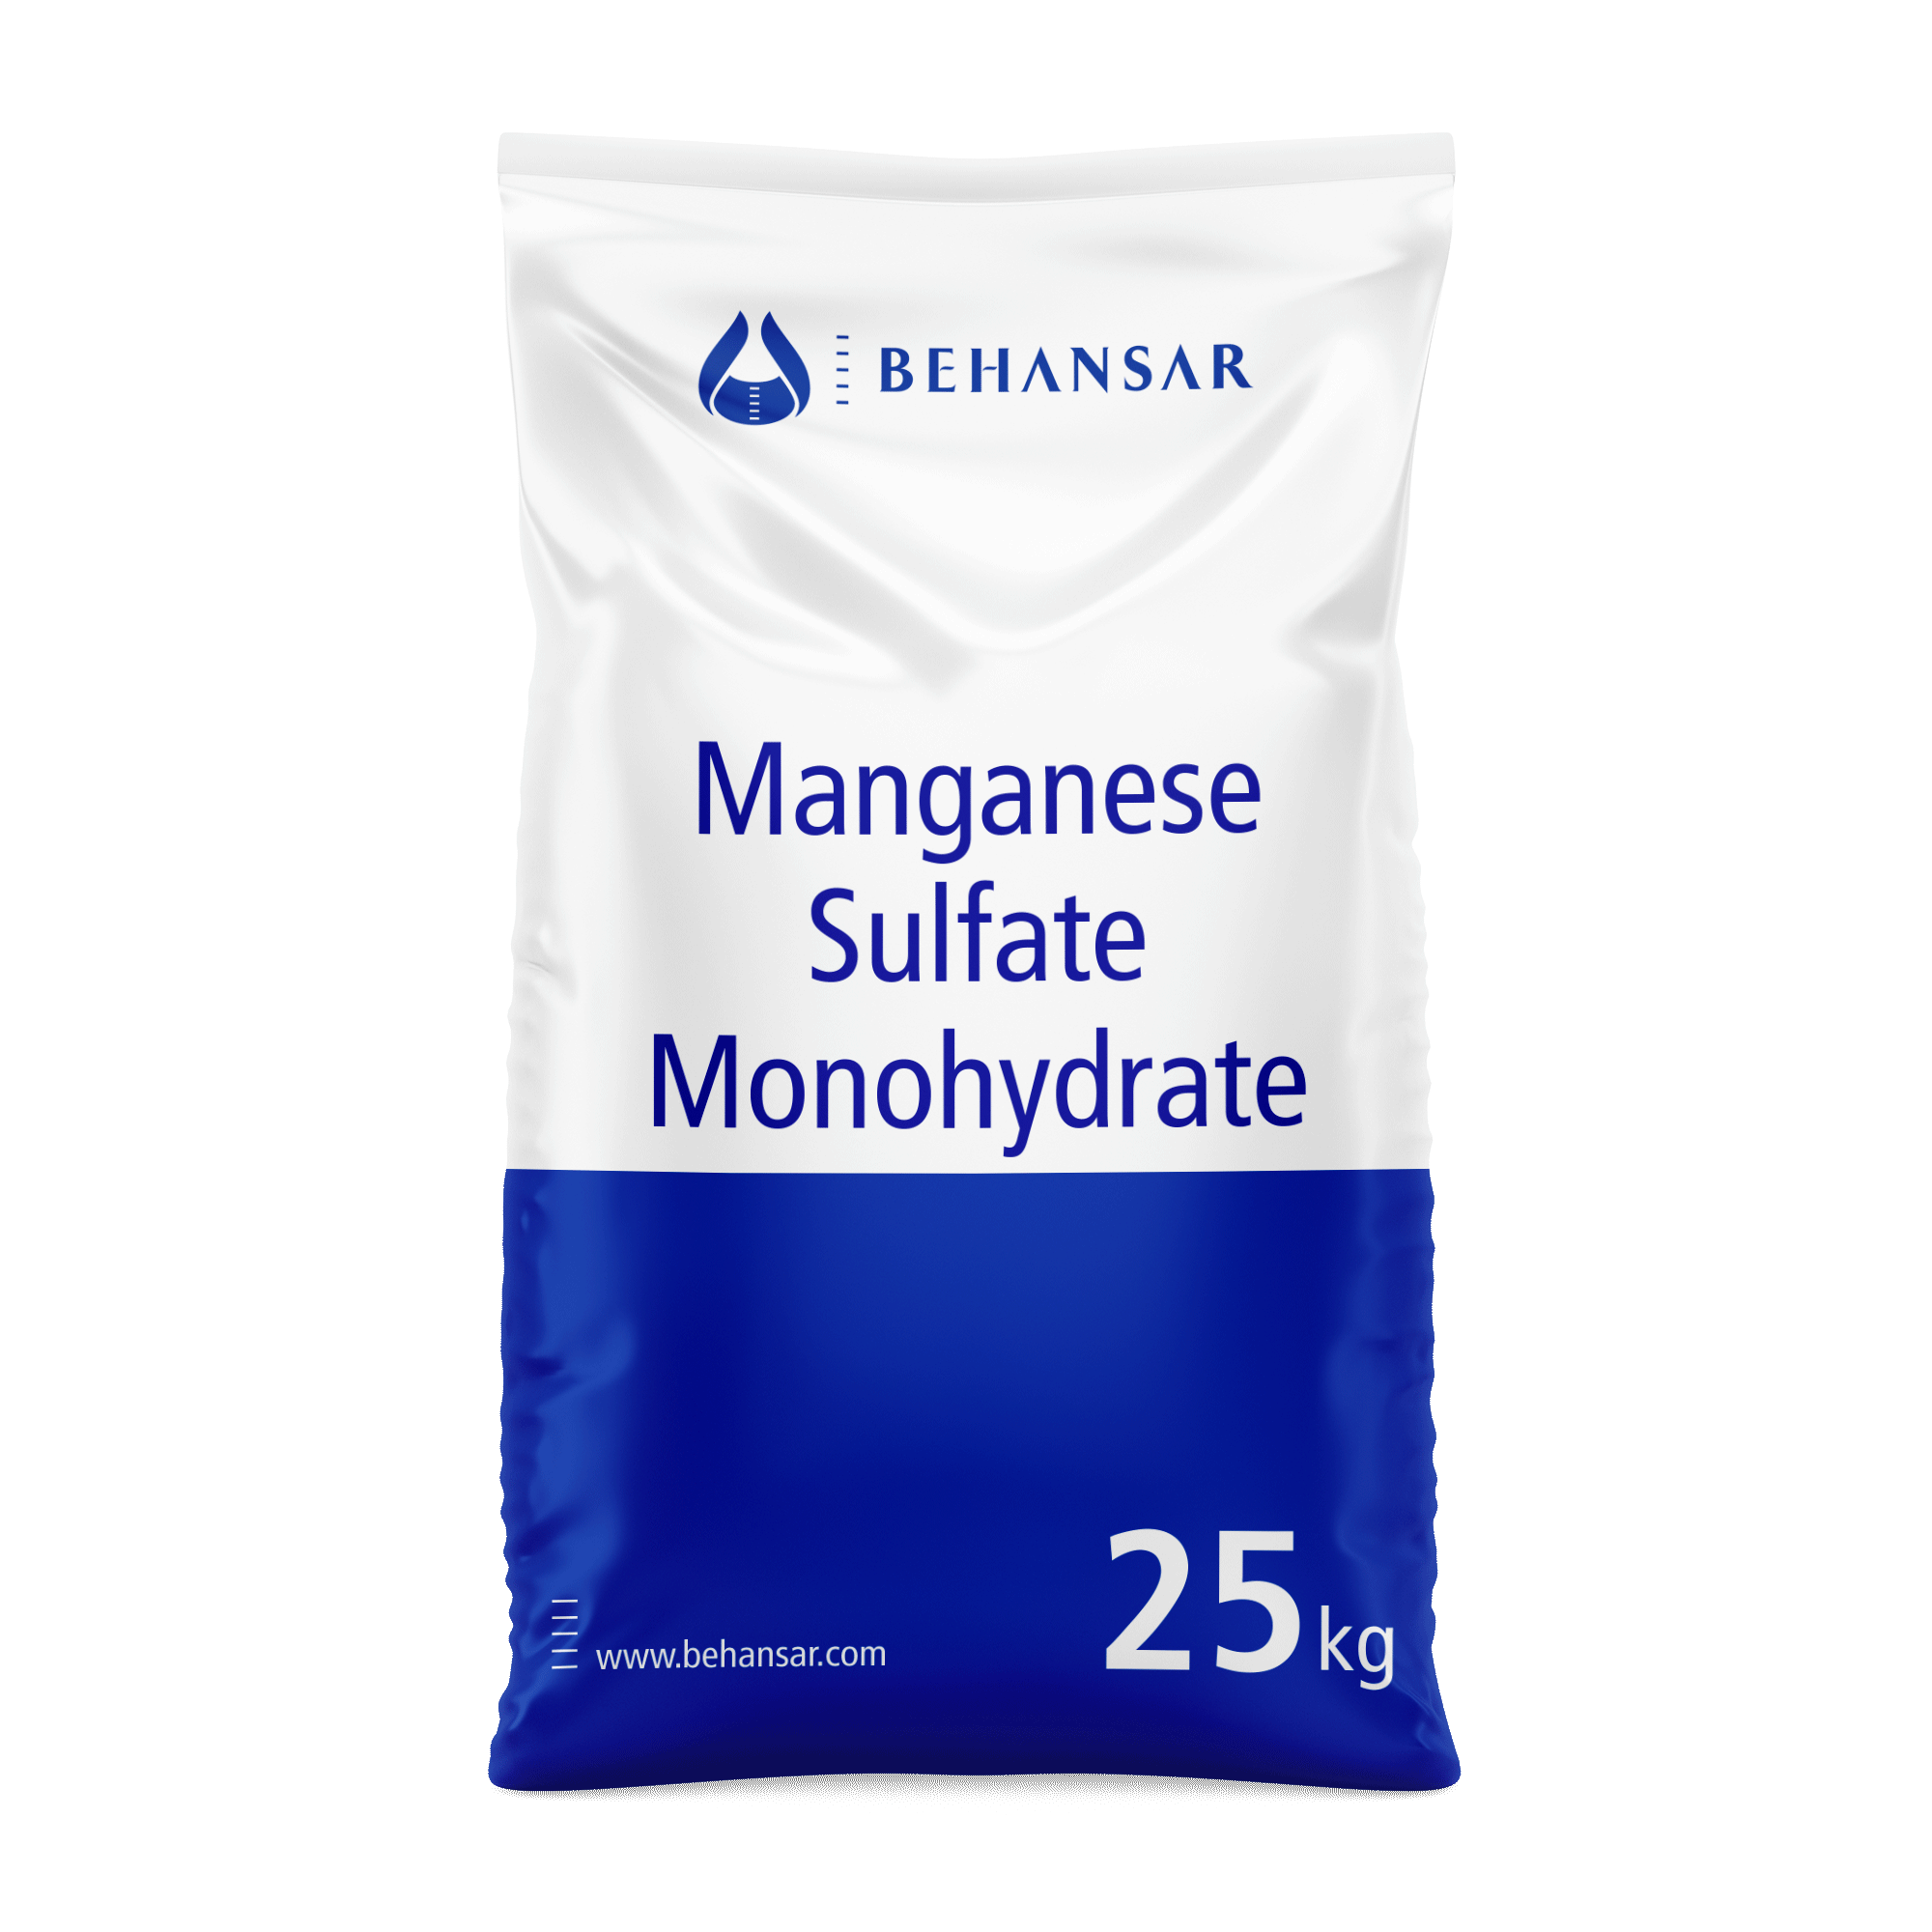 Manganese Sulfate Monohydrate is one of the products of Behansar Co